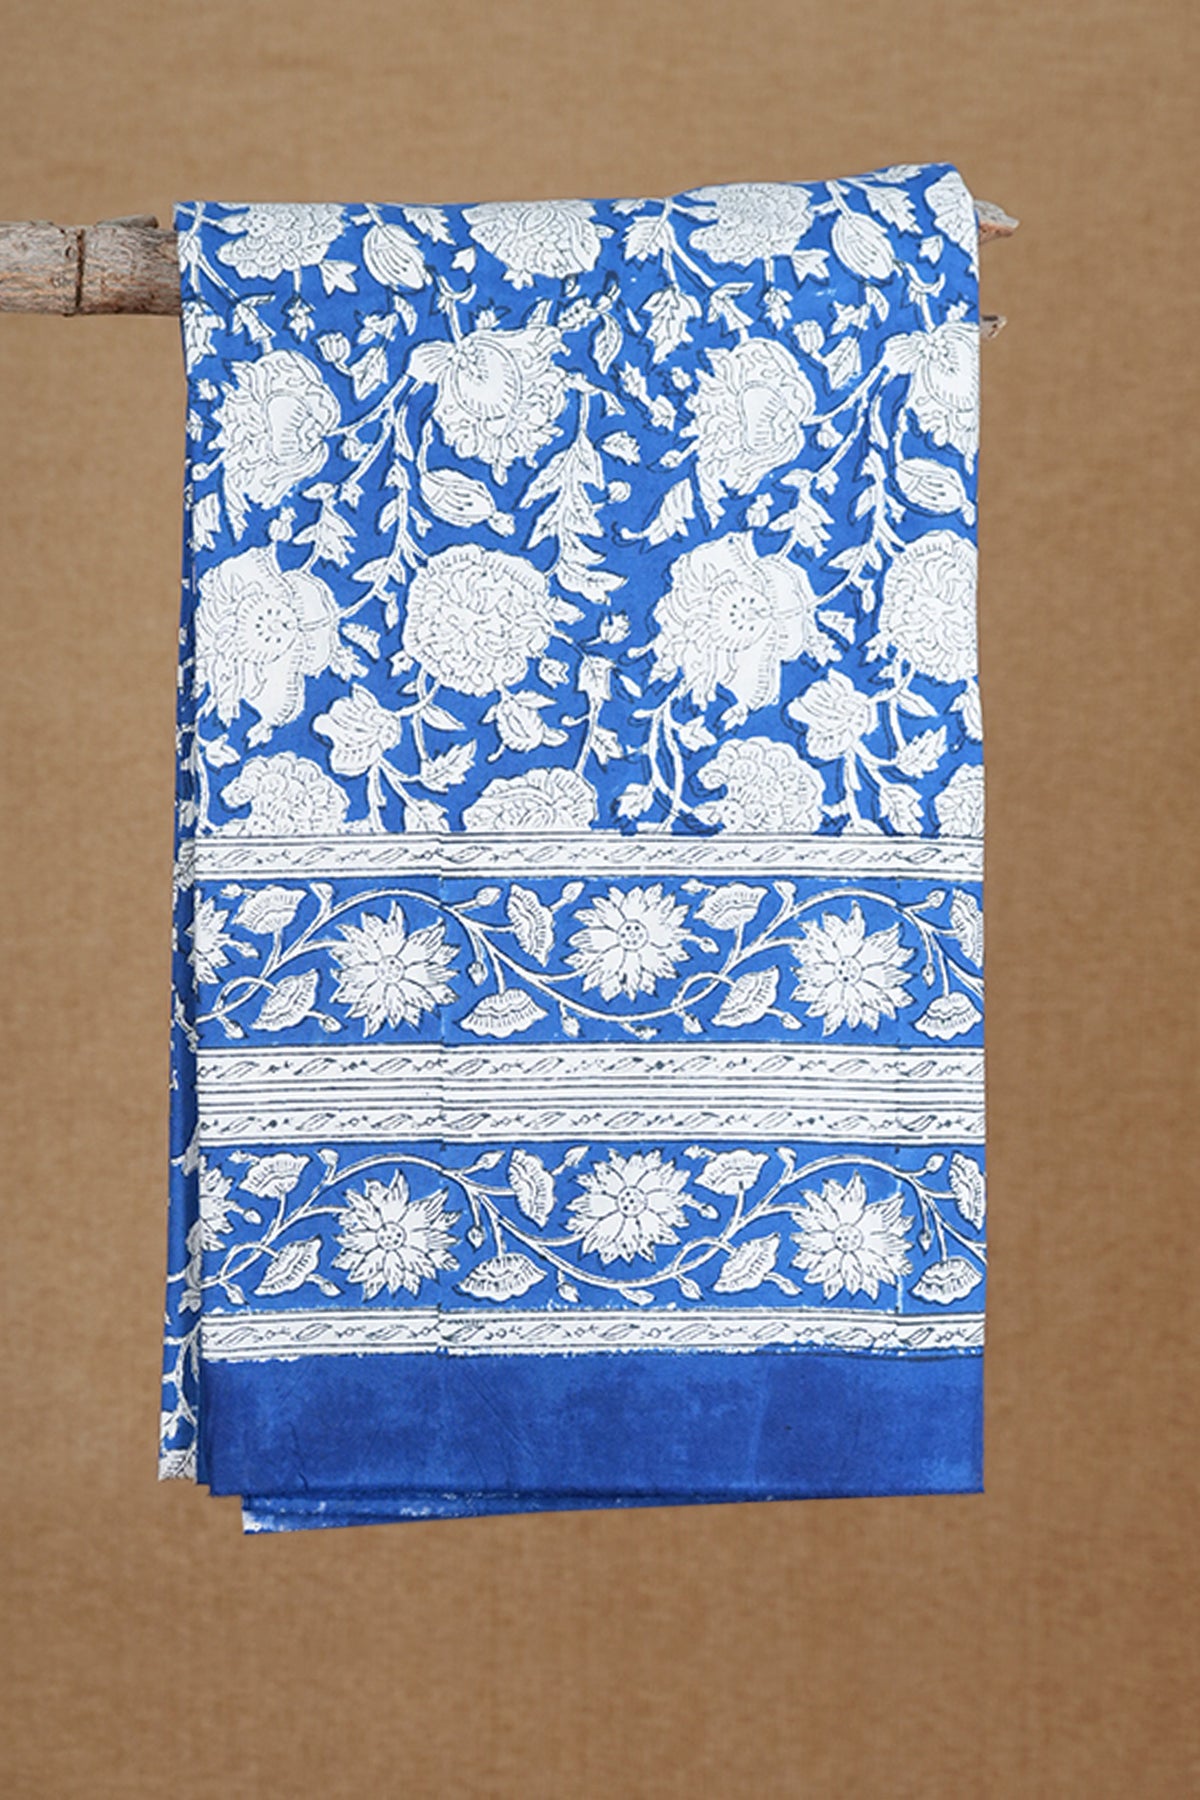 Floral And Leaf Block Printed Blue Double Bedspread